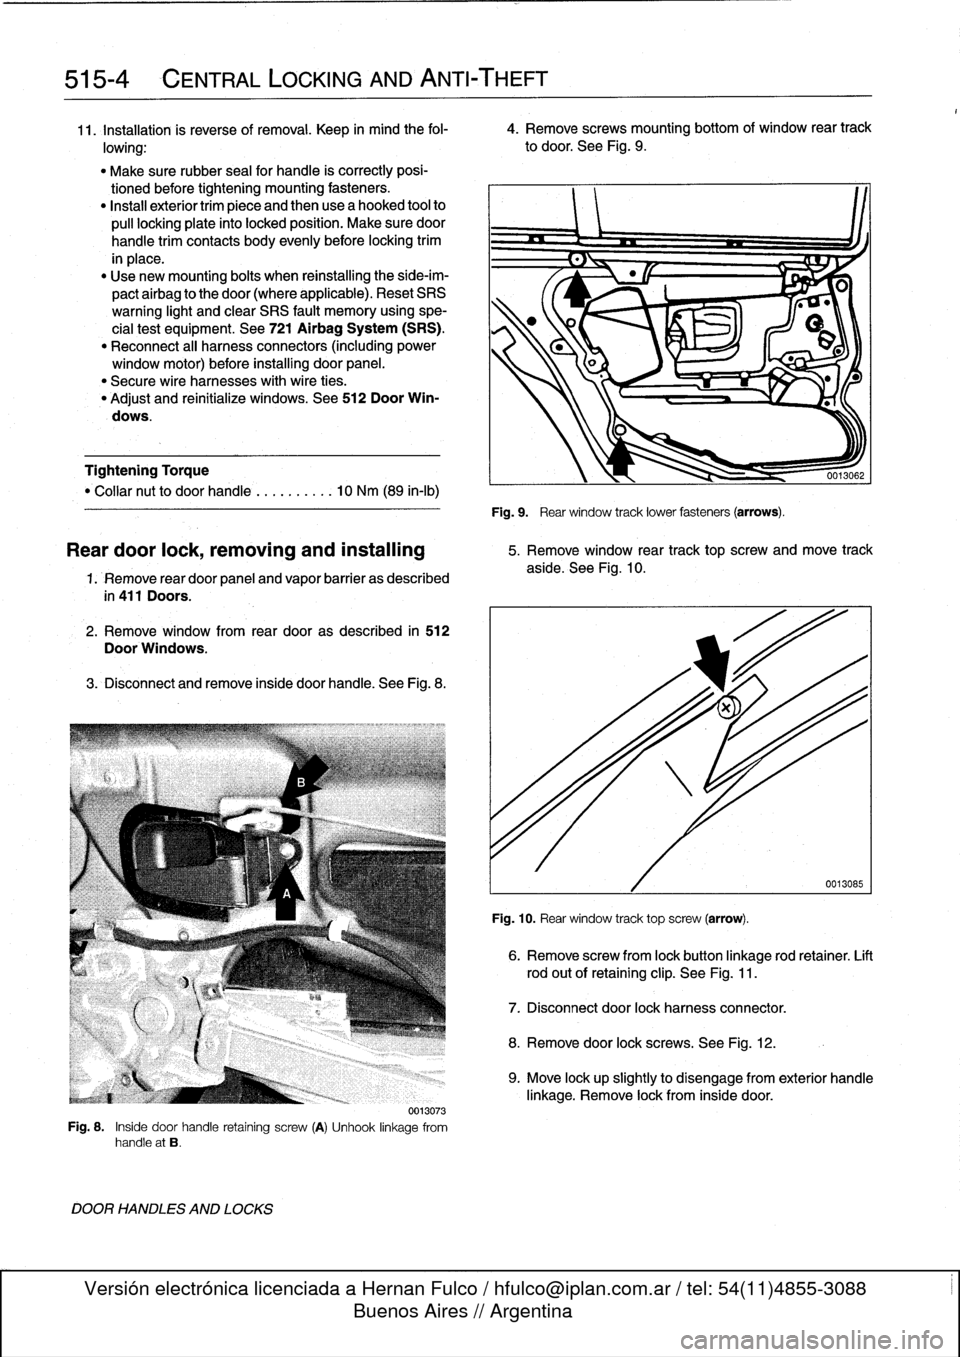 BMW 325i 1997 E36 Workshop Manual 
515-4

	

CENTRAL
LOCKING
AND
ANTI-THEFT

11
.
Installation
is
reverse
of
removal
.
Keep
in
mind
the
fol-

	

4
.
Remove
screws
mounting
bottom
of
window
rear
track

lowing
:

	

to
door
.
See
Fig
.
